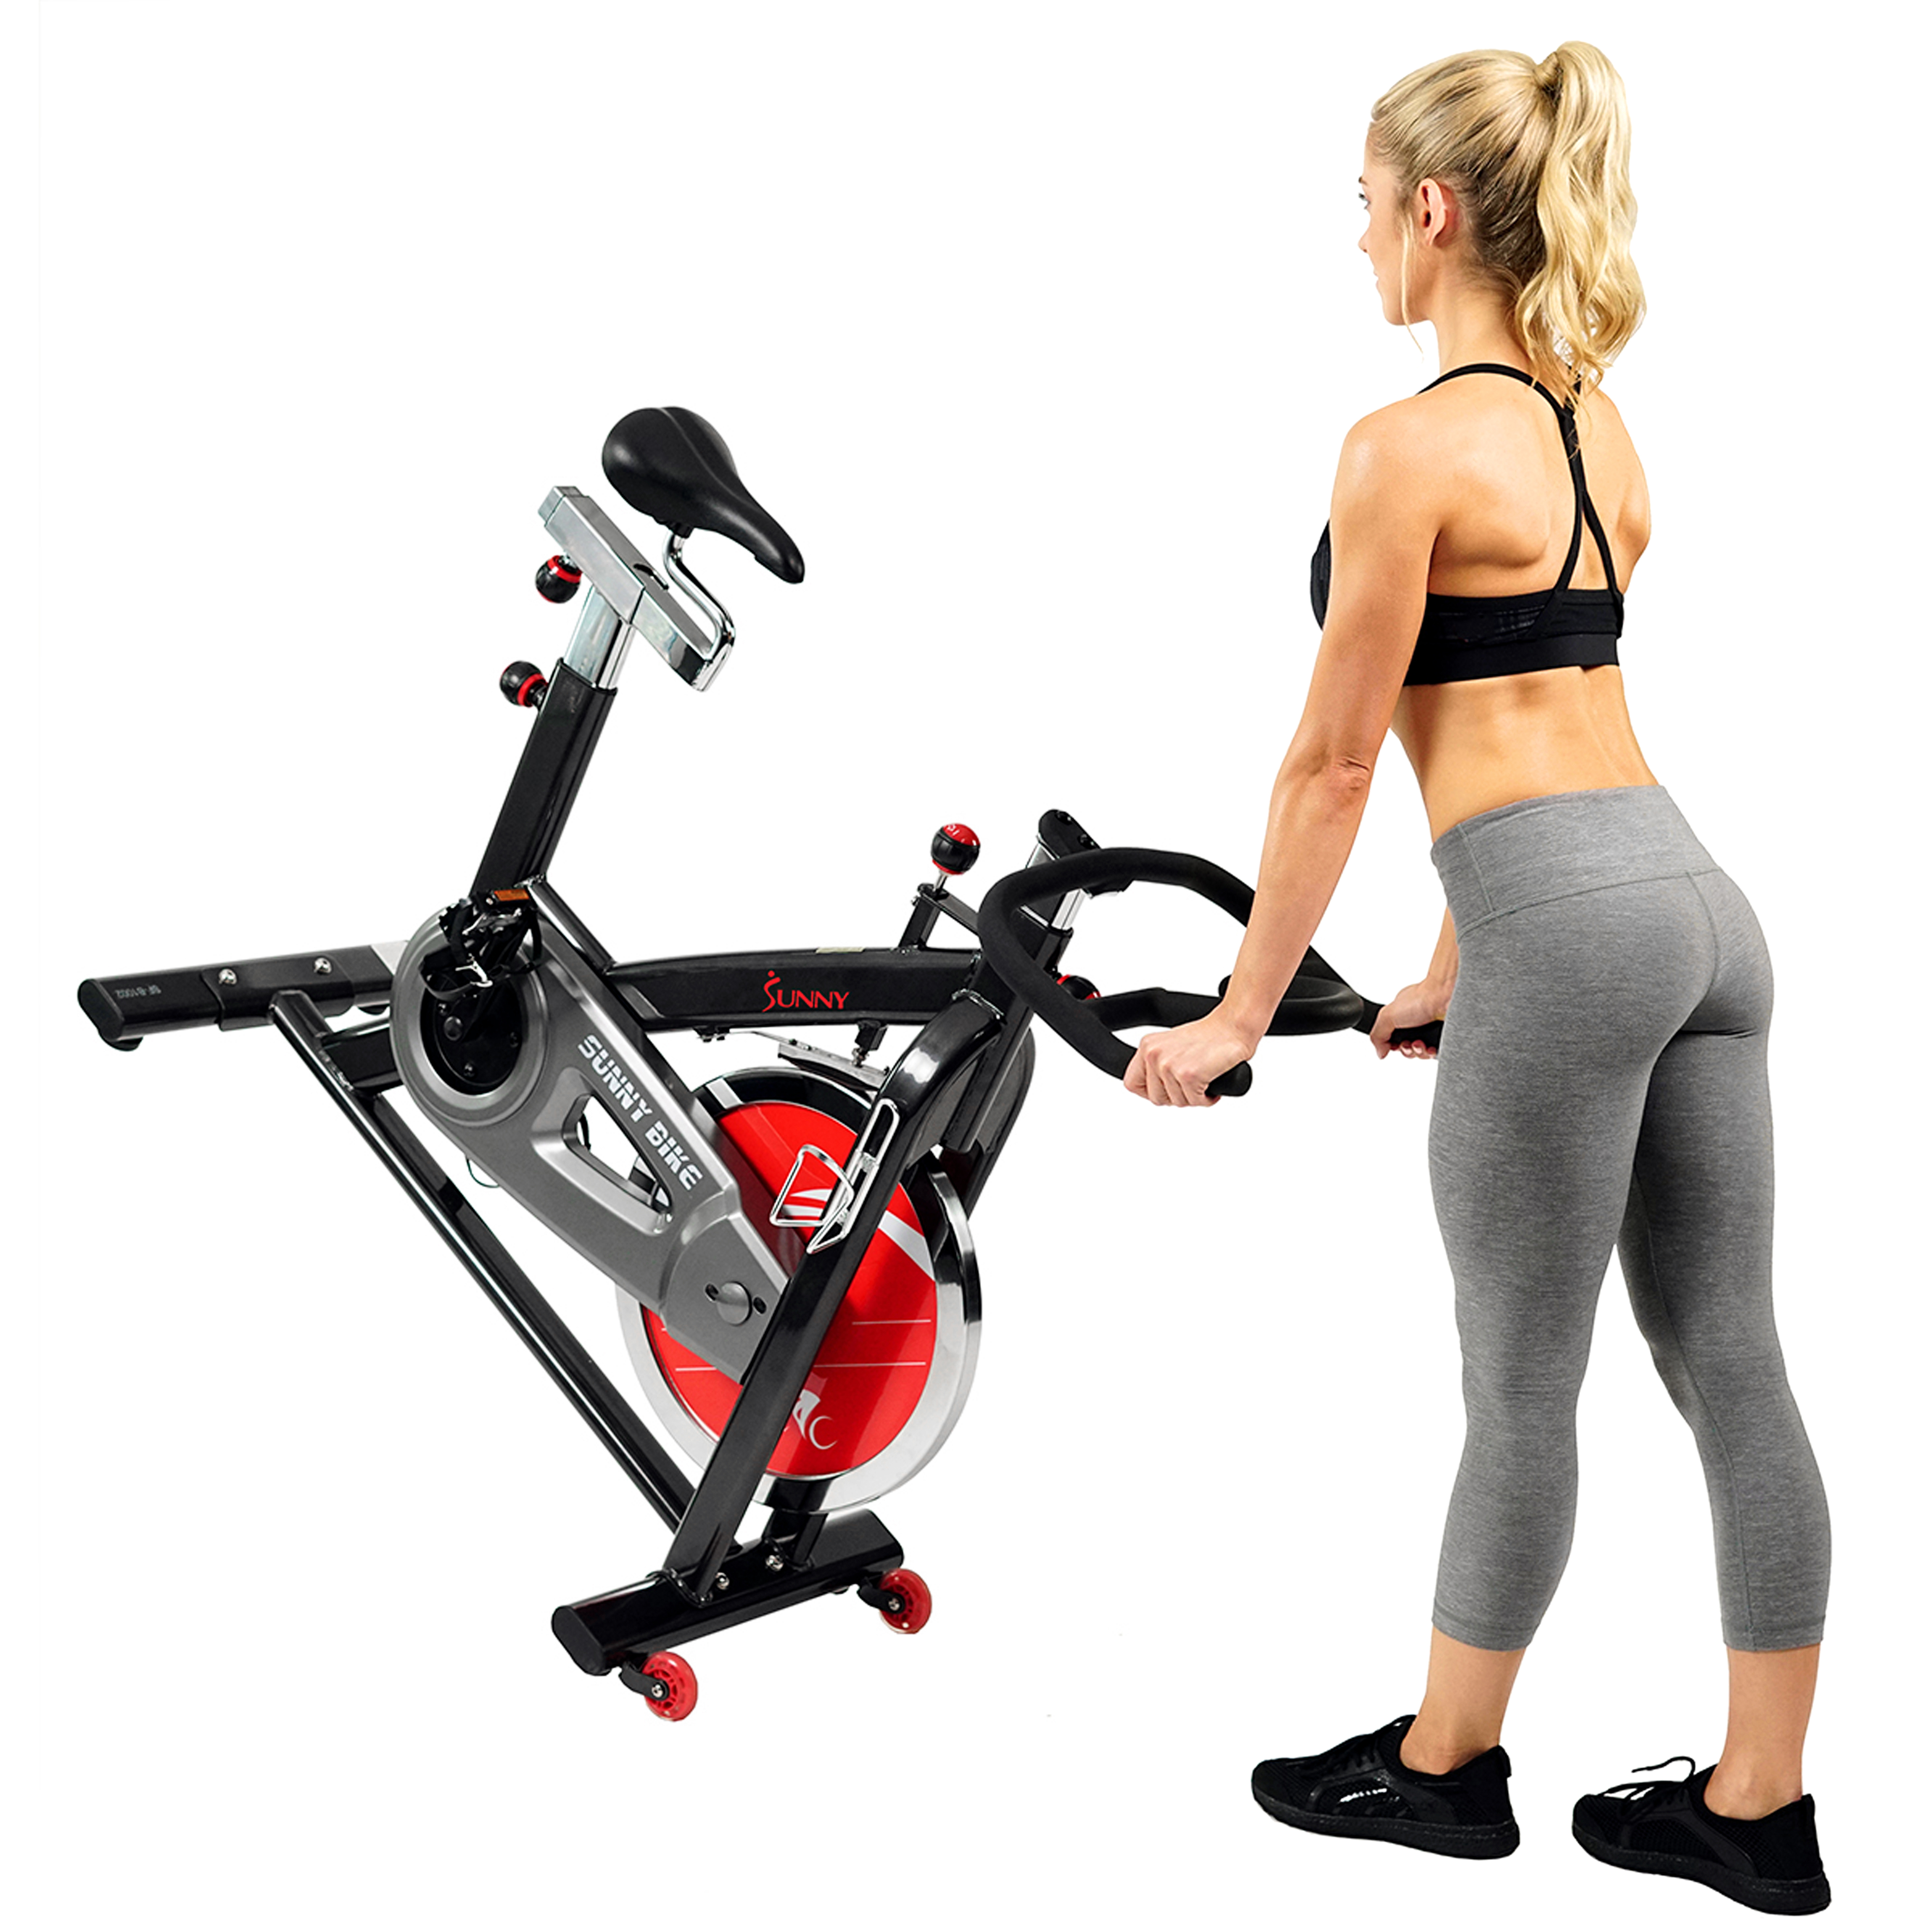 Sunny Health & Fitness Indoor Cycling Exercise Bike Workout Machine Belt Drive - SF-B1002 - image 3 of 9